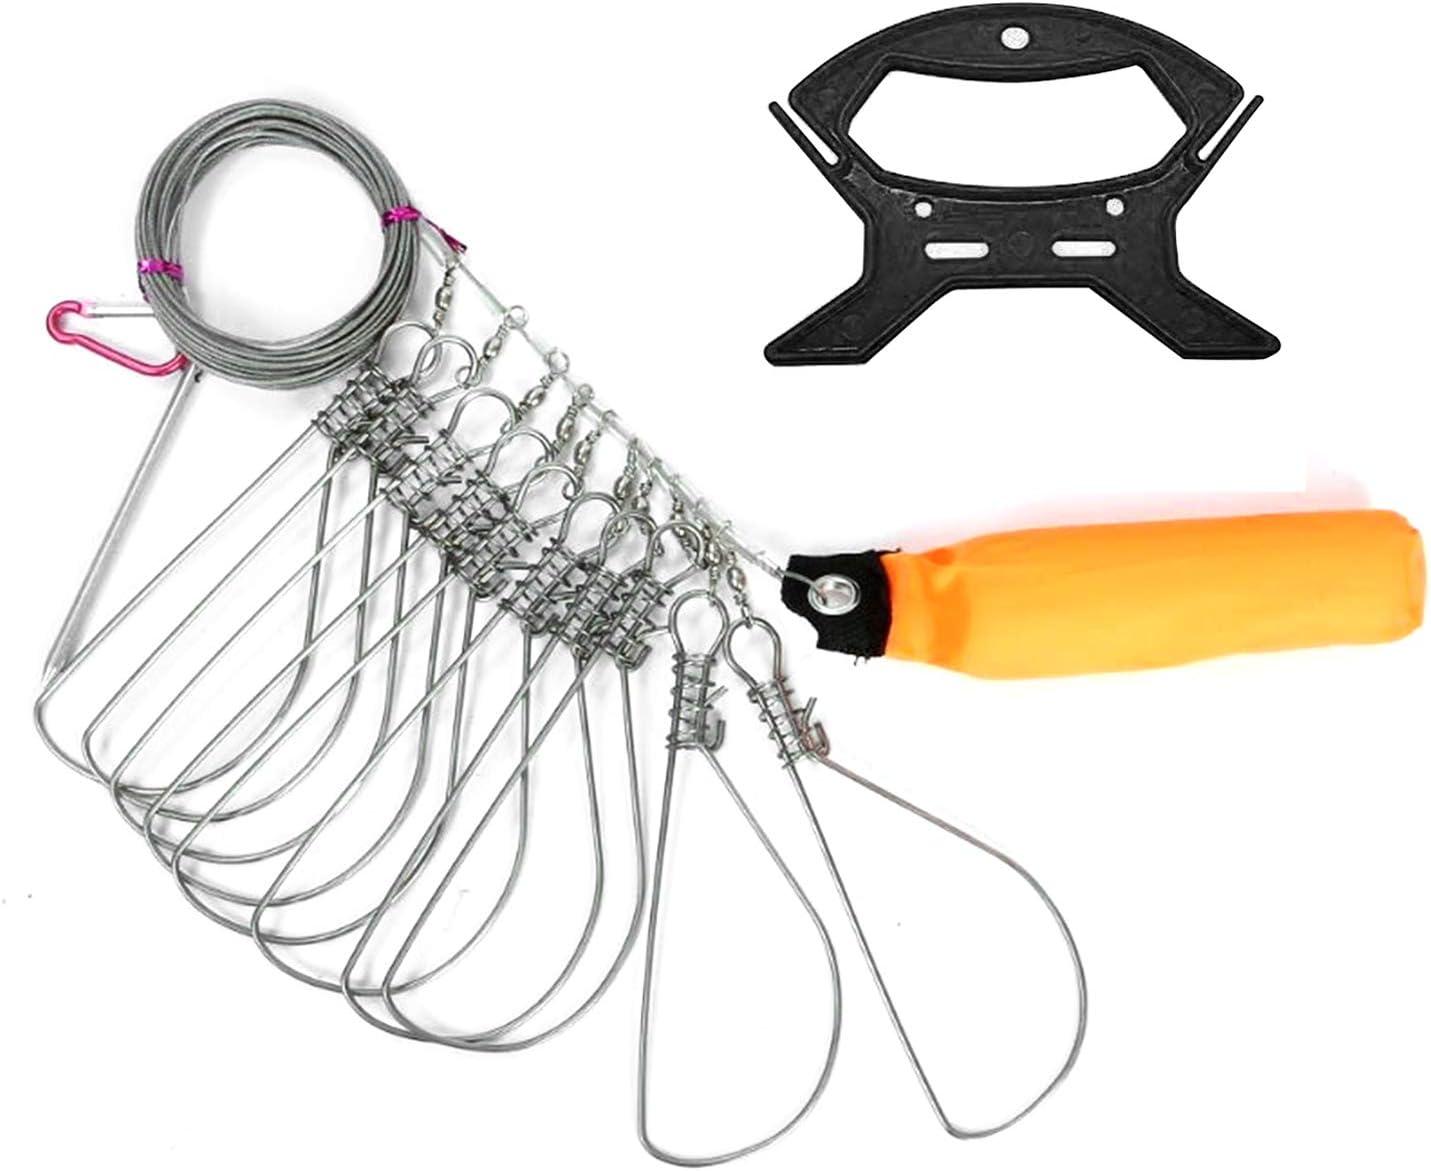 Fish Stringer Fishing Stringer Clip Live Fish Lock With High